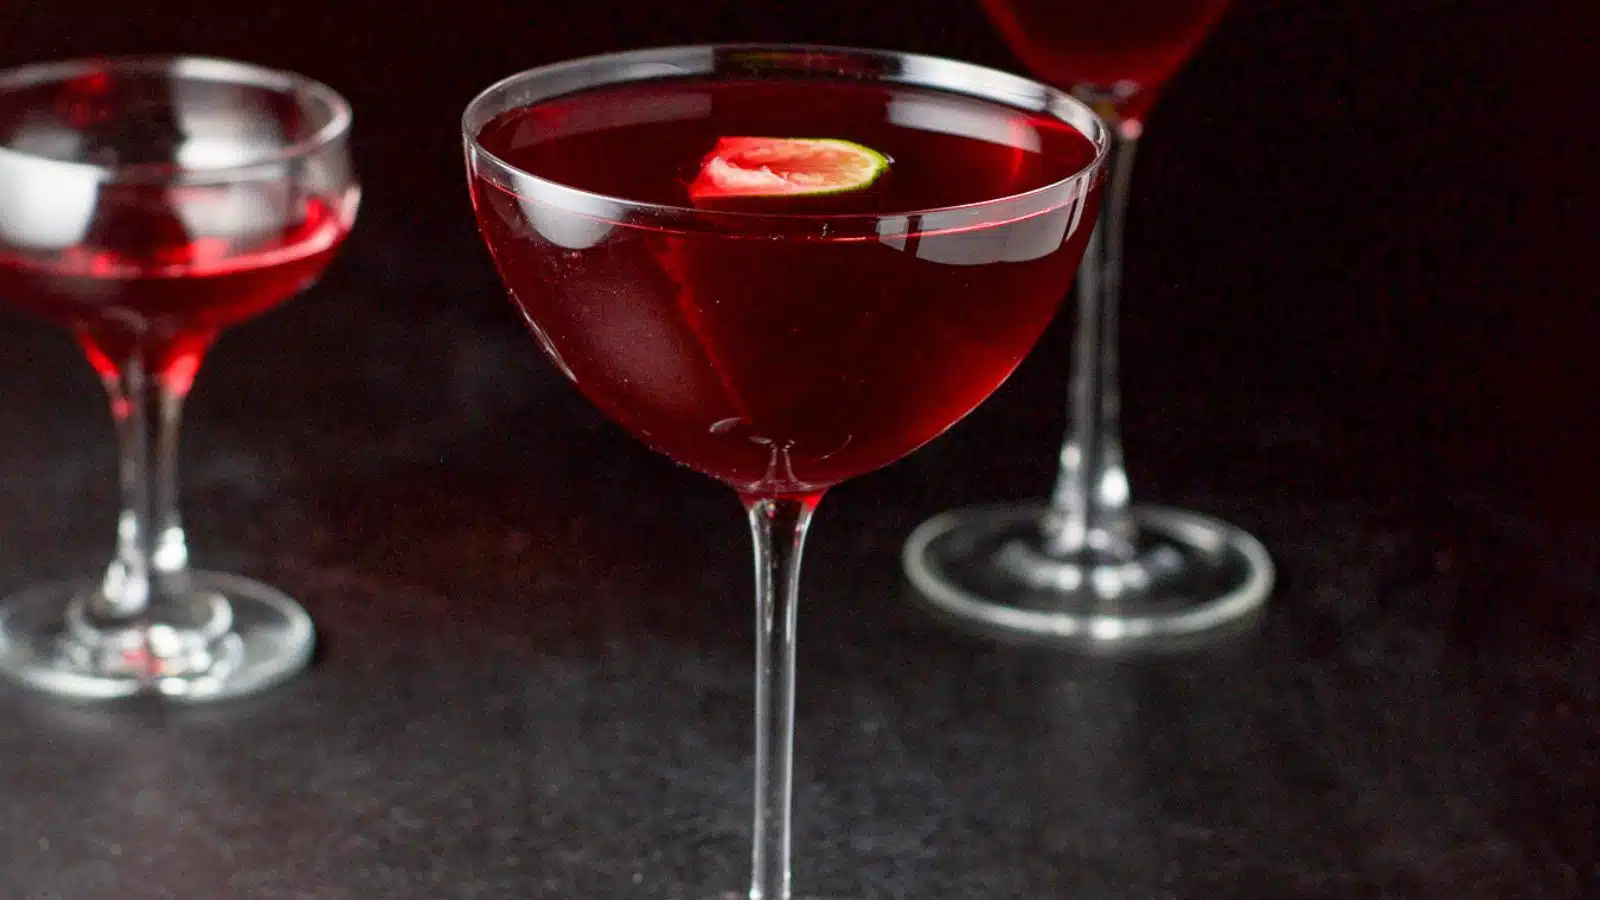 A bowl glass filled with the red cocktail with two others behind with lime wedges in as garnish